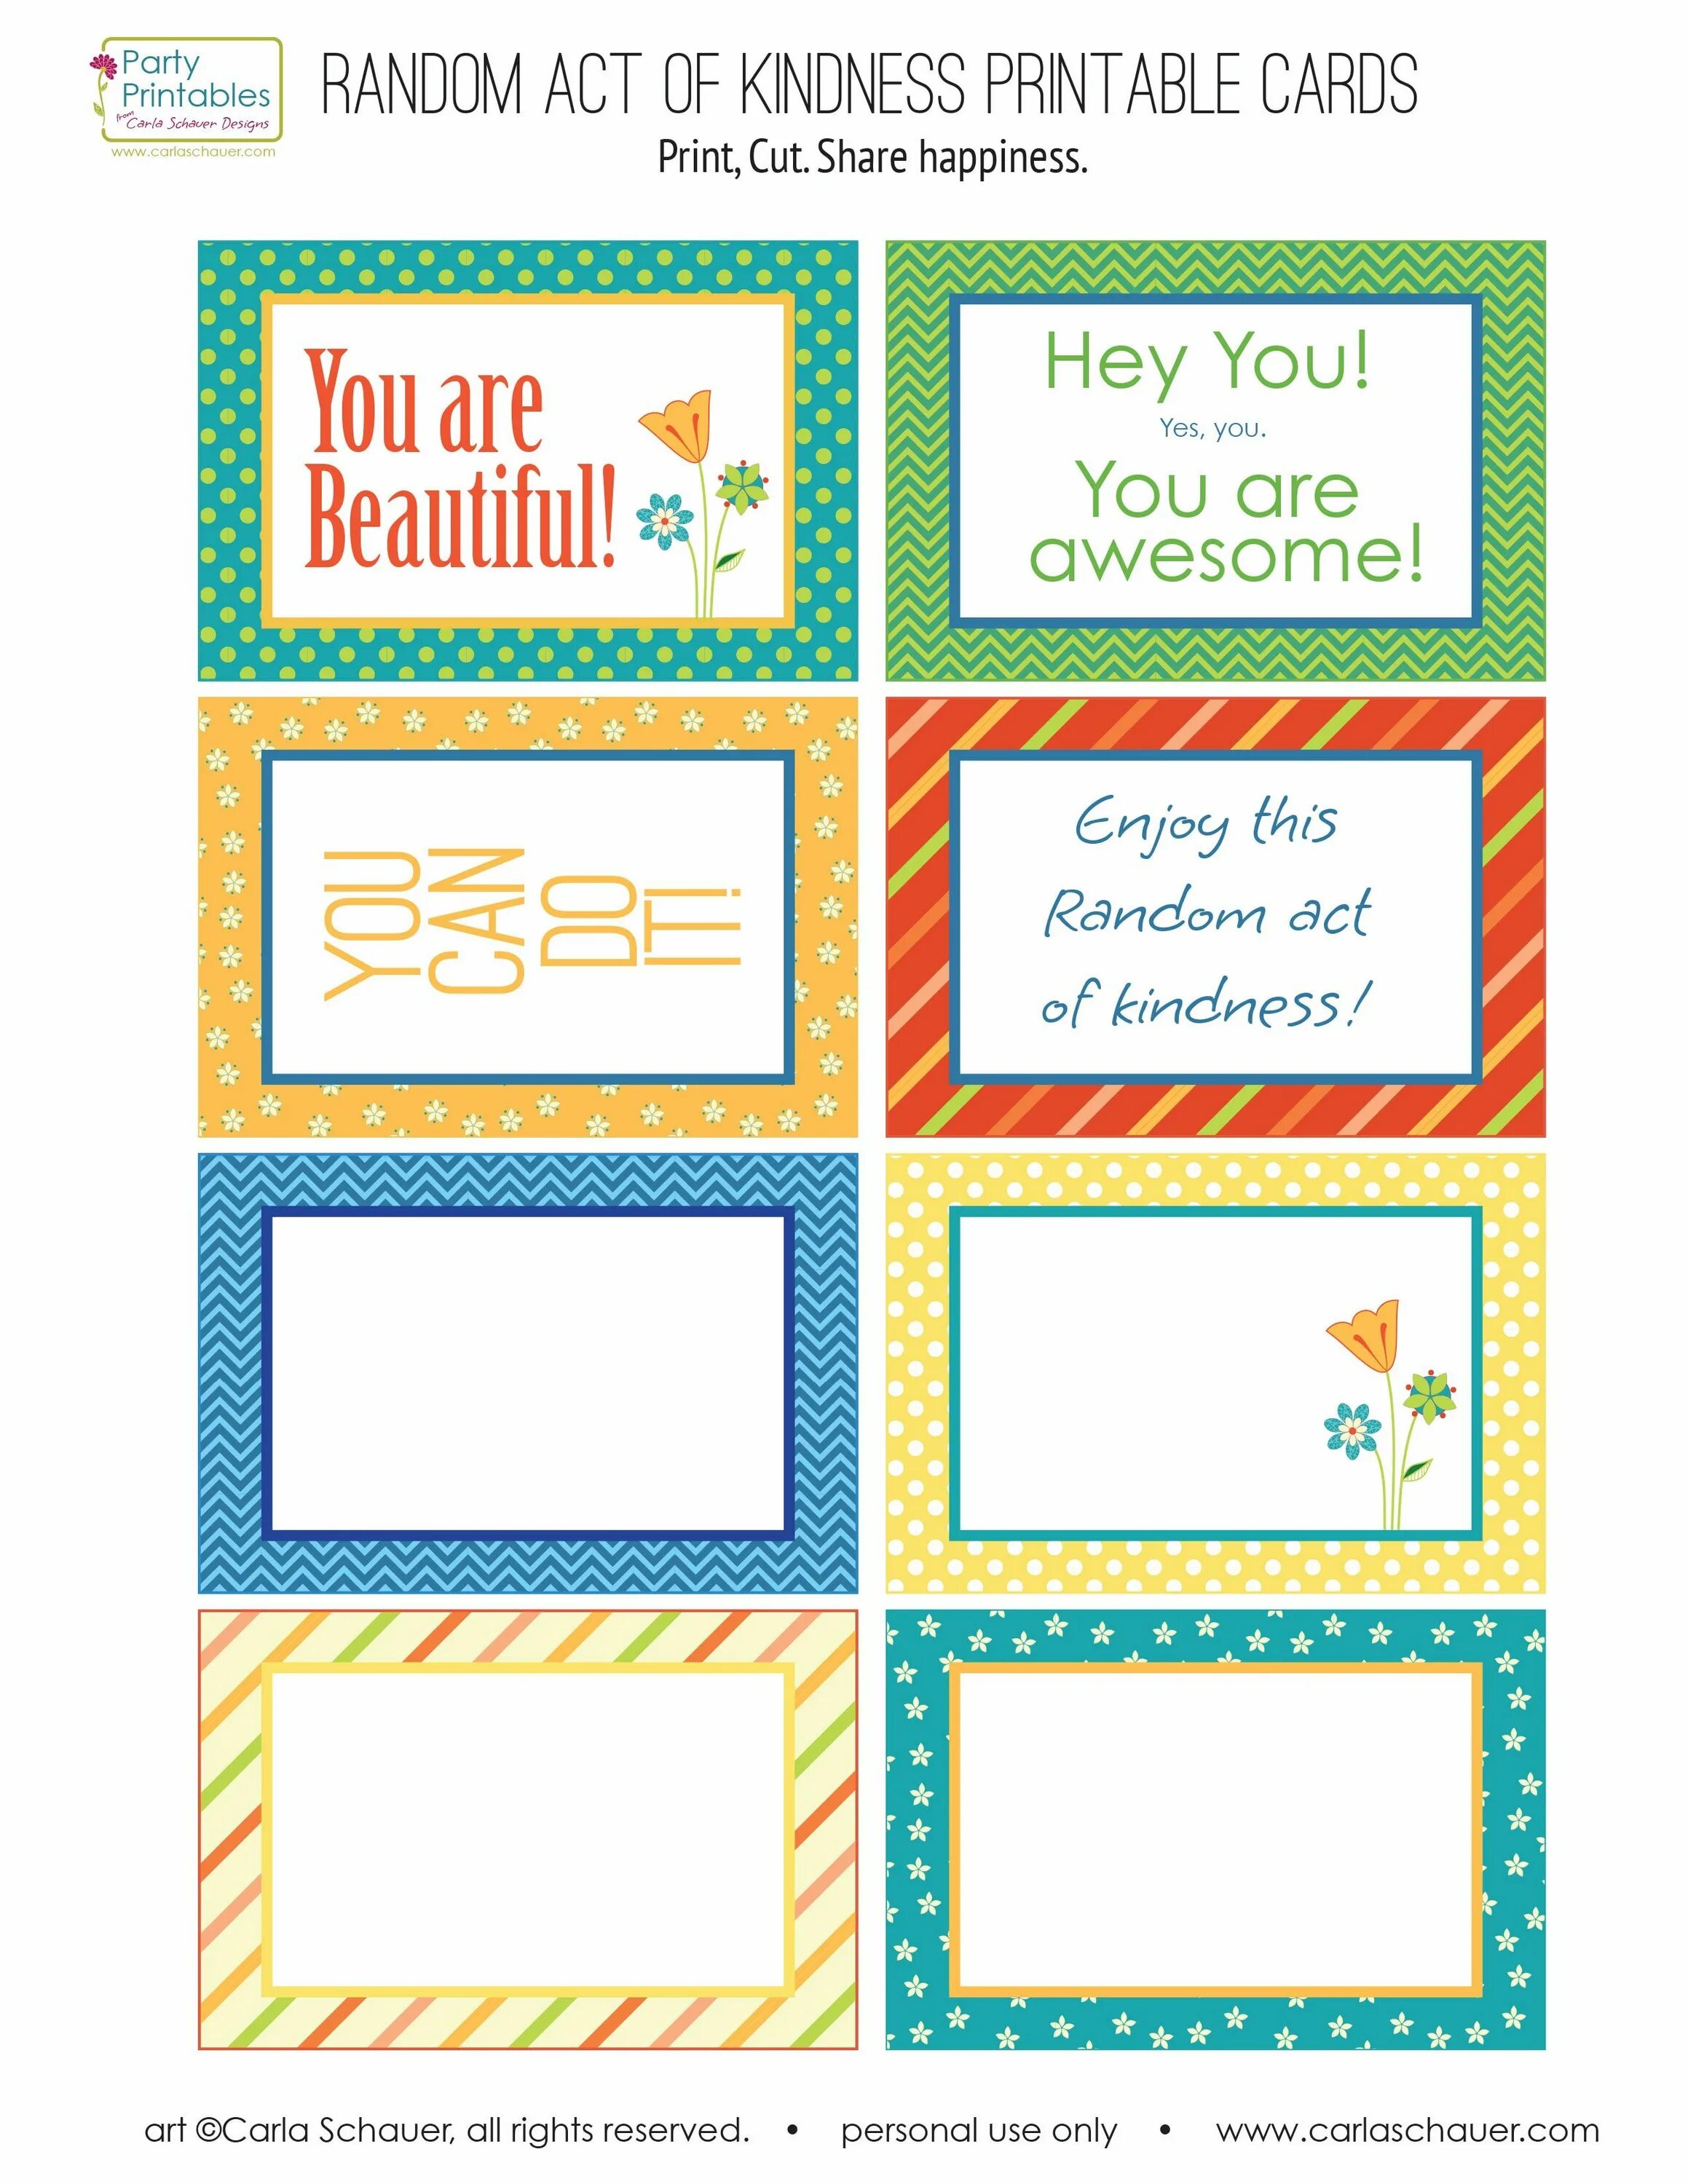 Printable cards. Random Acts of Kindness шаблон. Free Printable Cards. Kindness Printable. Act of Kindness Card.